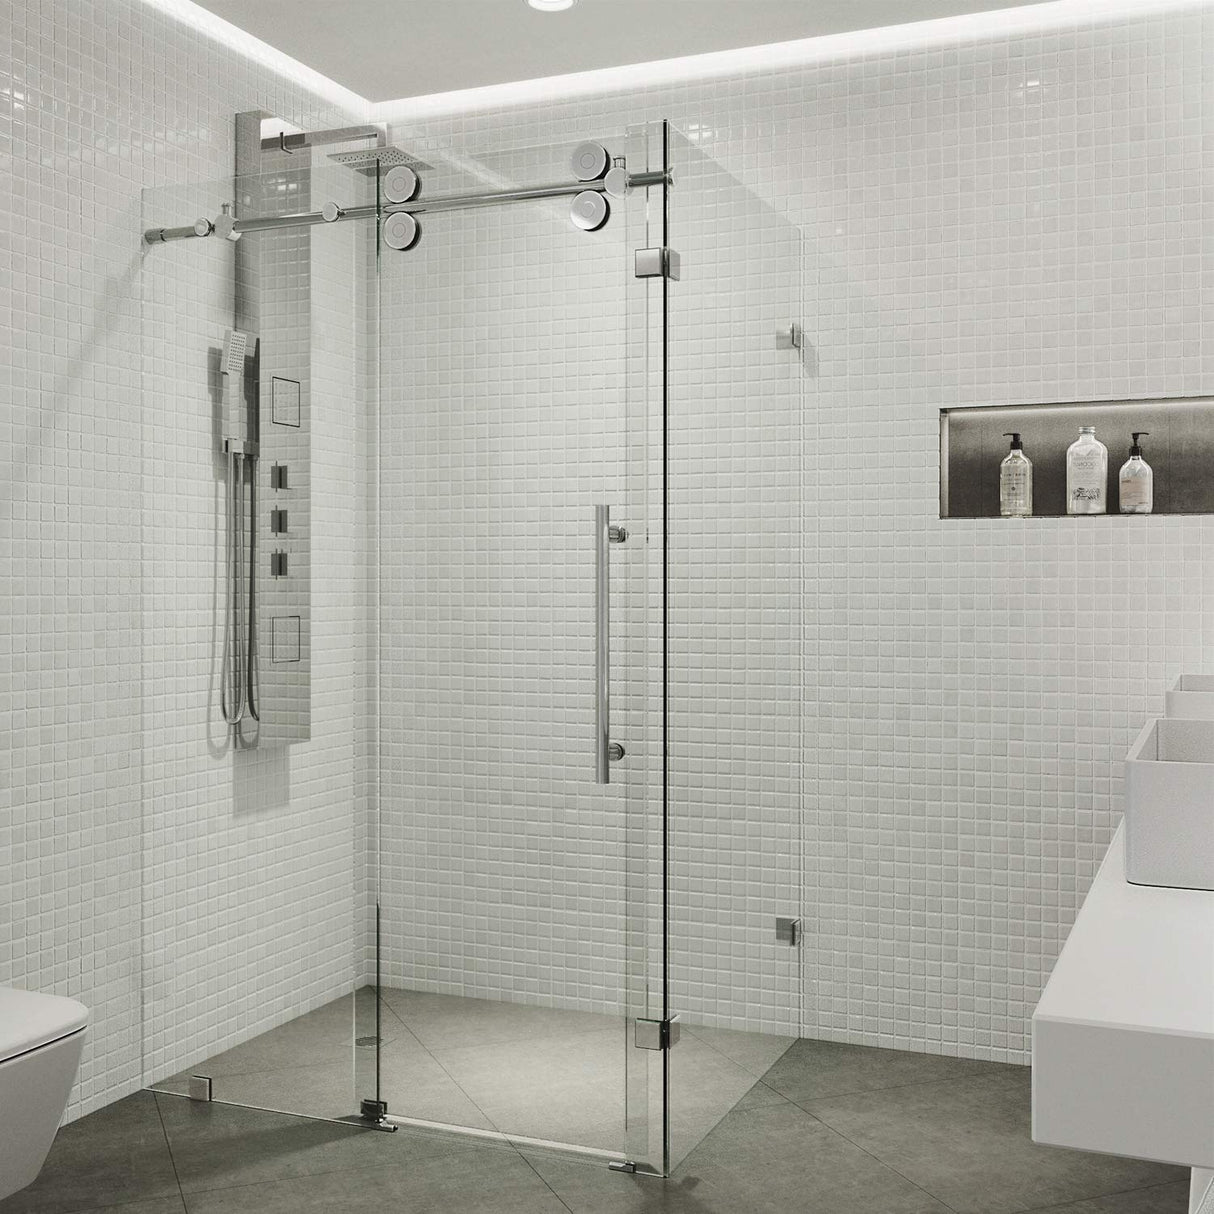 VIGO VG6051CHCL48 34.63" -46.5" W -74.0" H Frameless Sliding Rectangle Shower Enclosure with Clear 0.38" Tempered Glass and Stainless Steel Hardware in Chrome Finish with Reversible Handle